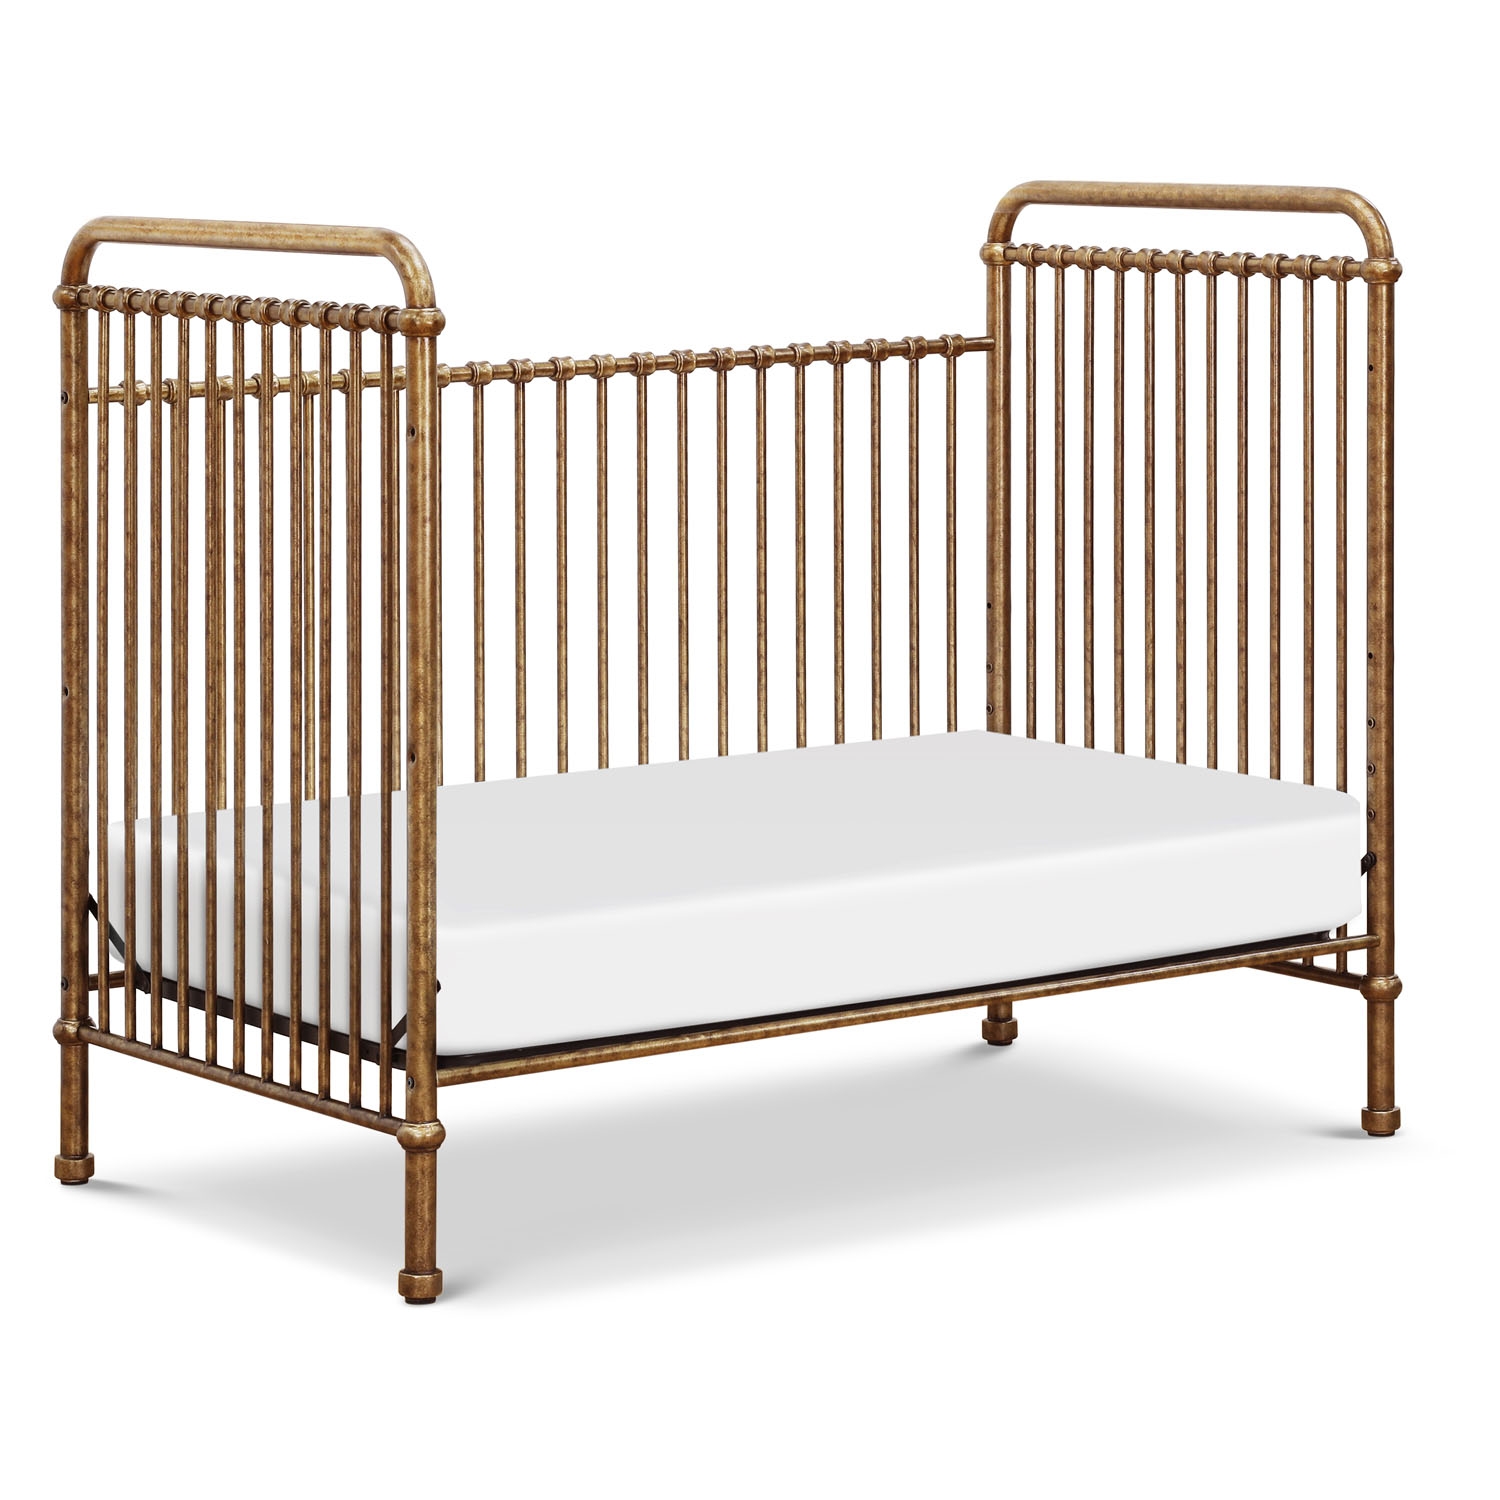 Aurora French Country Vintage Gold Steel Convertible Crib - Image 2